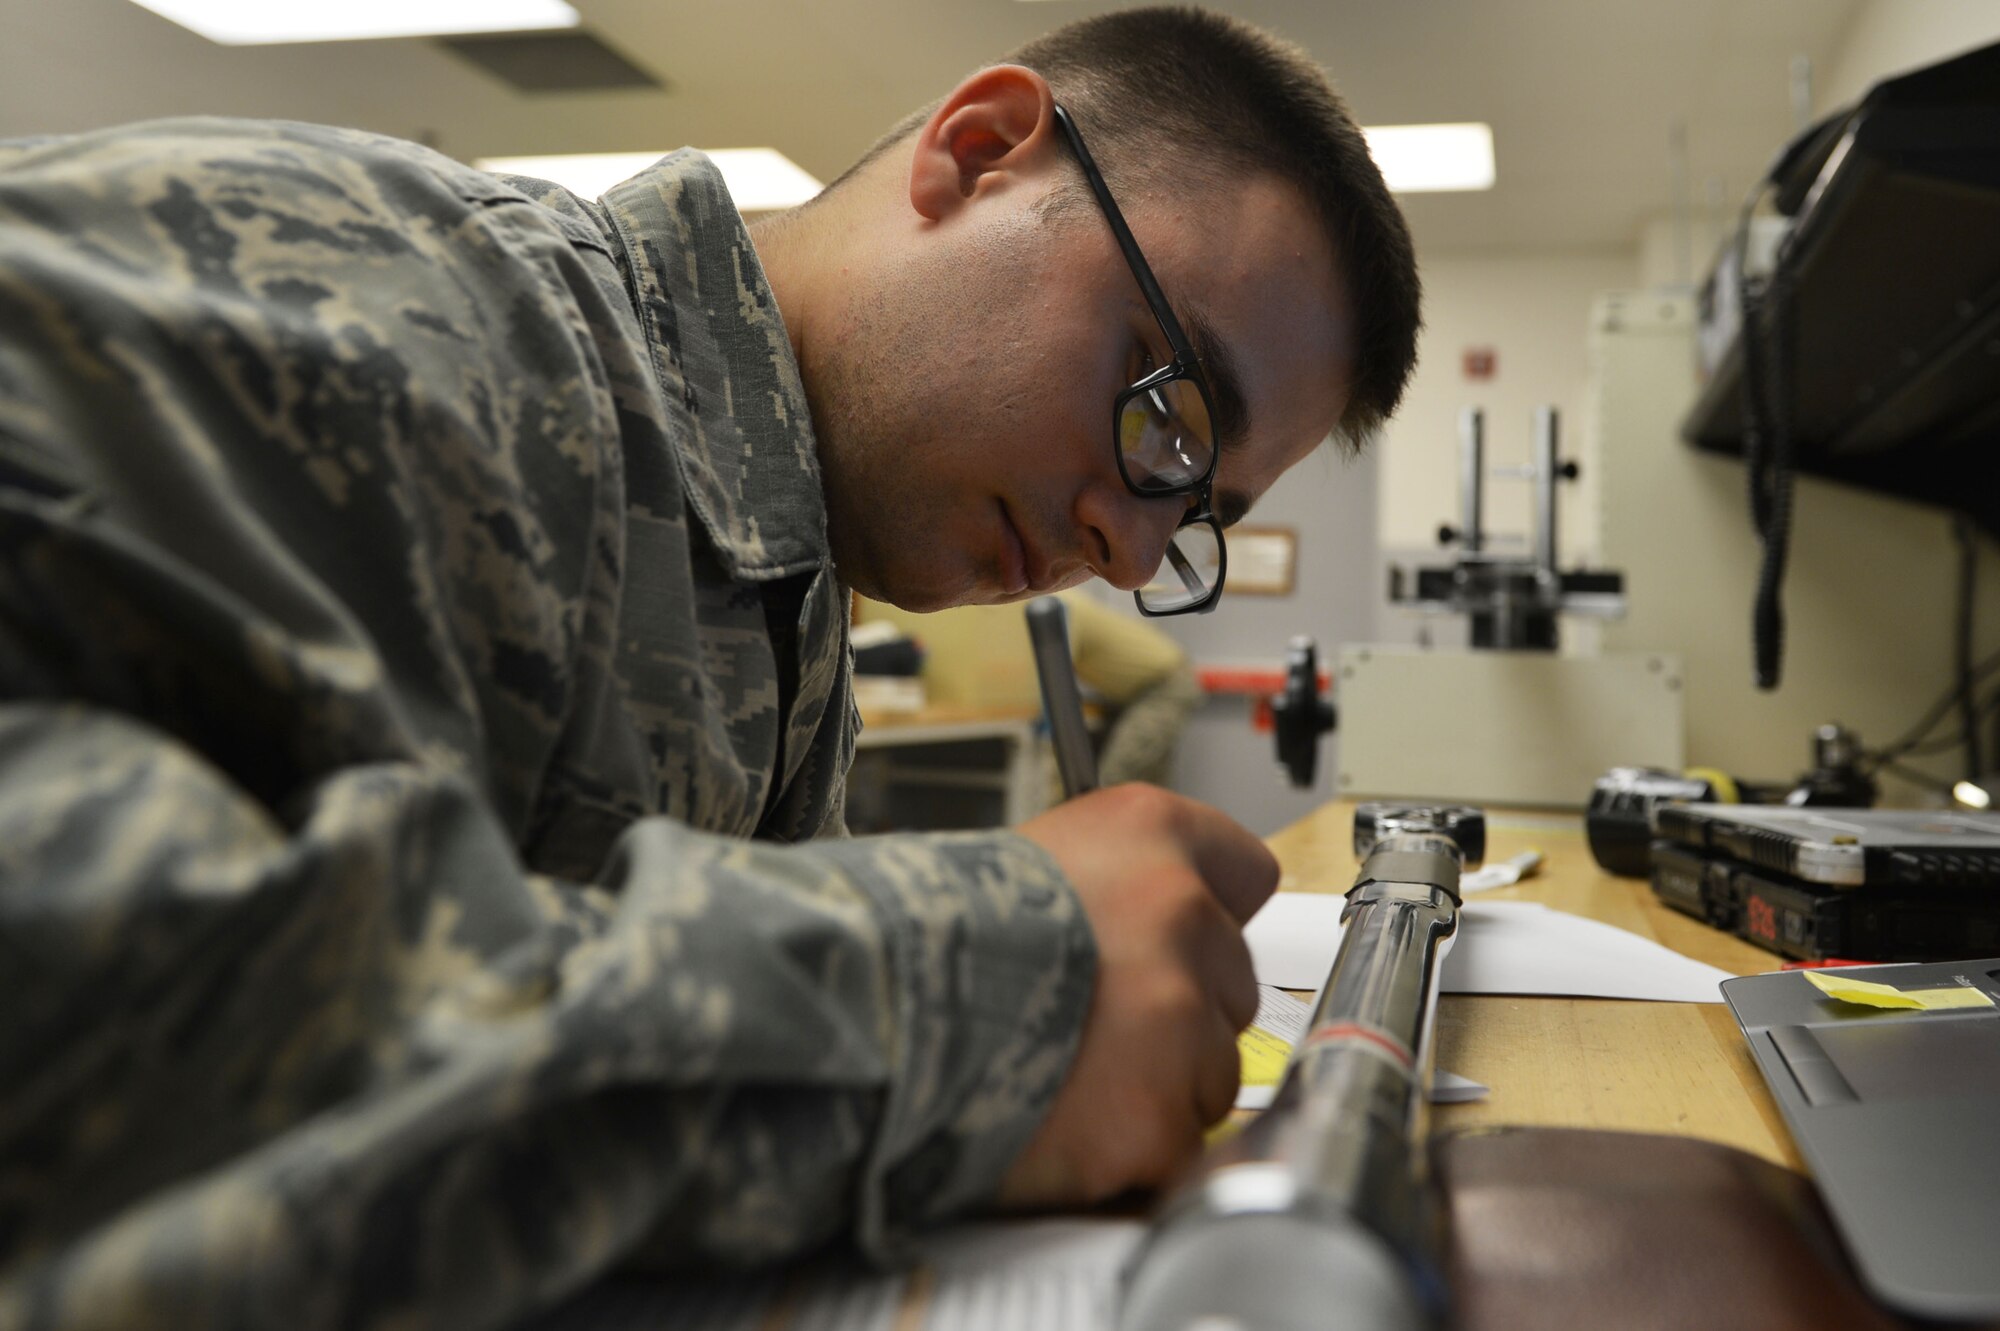 U.S. Air Force Airman 1st Class Paul Lippe, 20th Component Maintenance Squadron precision measurement equipment laboratory technician calibrates a torque wrench at Shaw Air Force Base, S.C., July 11, 2016. Lippe calibrated the torque wrench to ensure repairs made with it maintain Air Force standards. (U.S. Air Force photo by Airman 1st Class Christopher Maldonado)